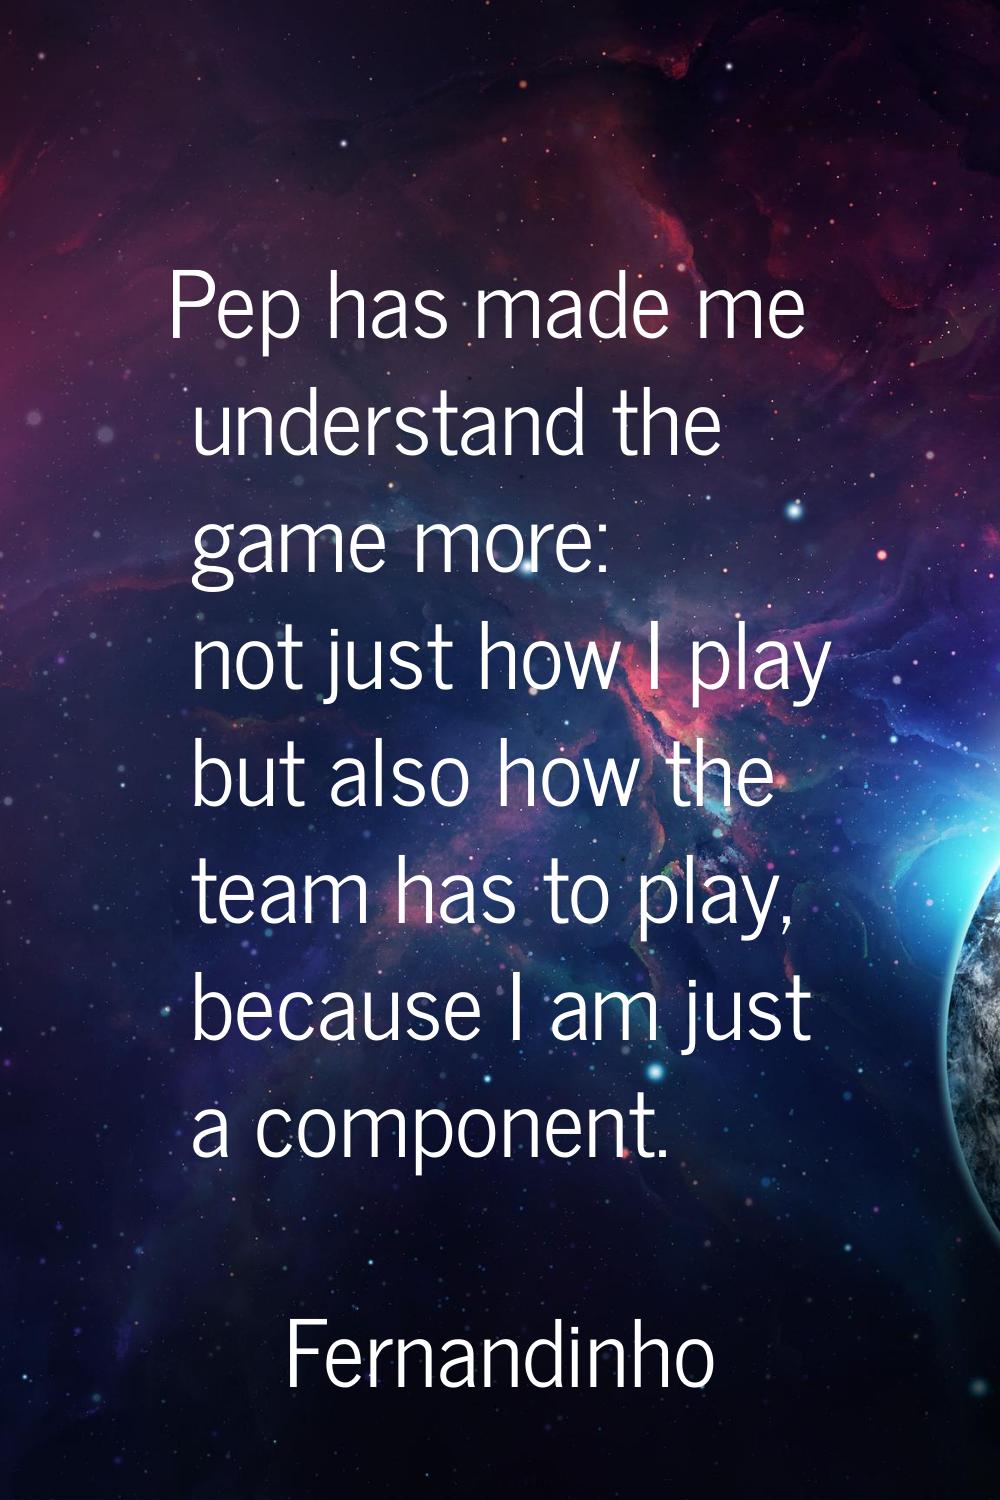 Pep has made me understand the game more: not just how I play but also how the team has to play, be